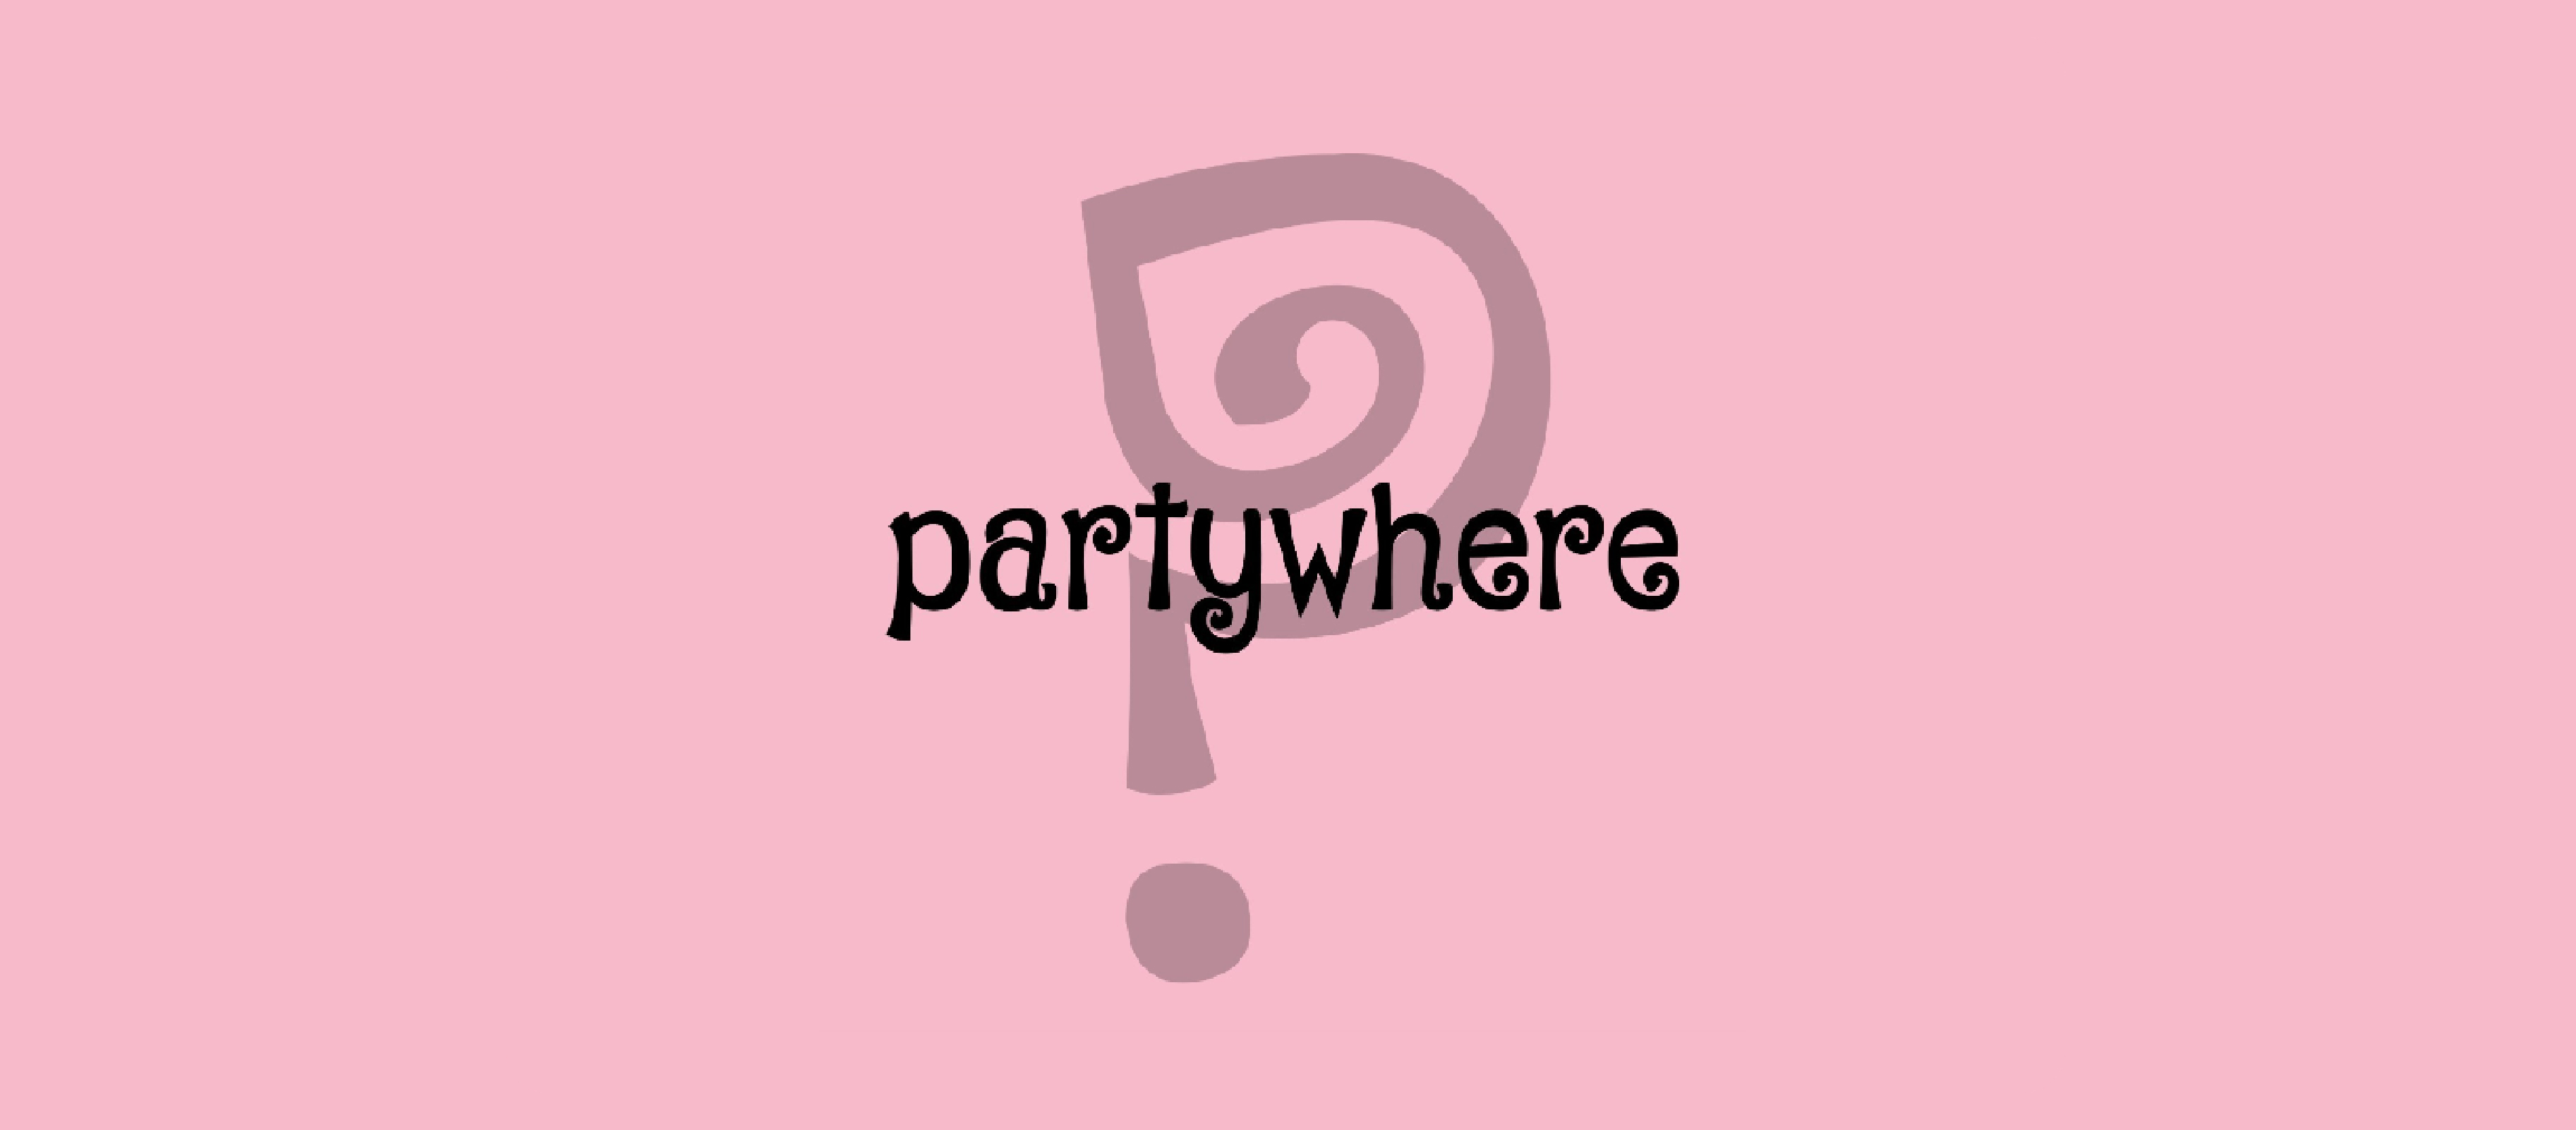  partywhere?